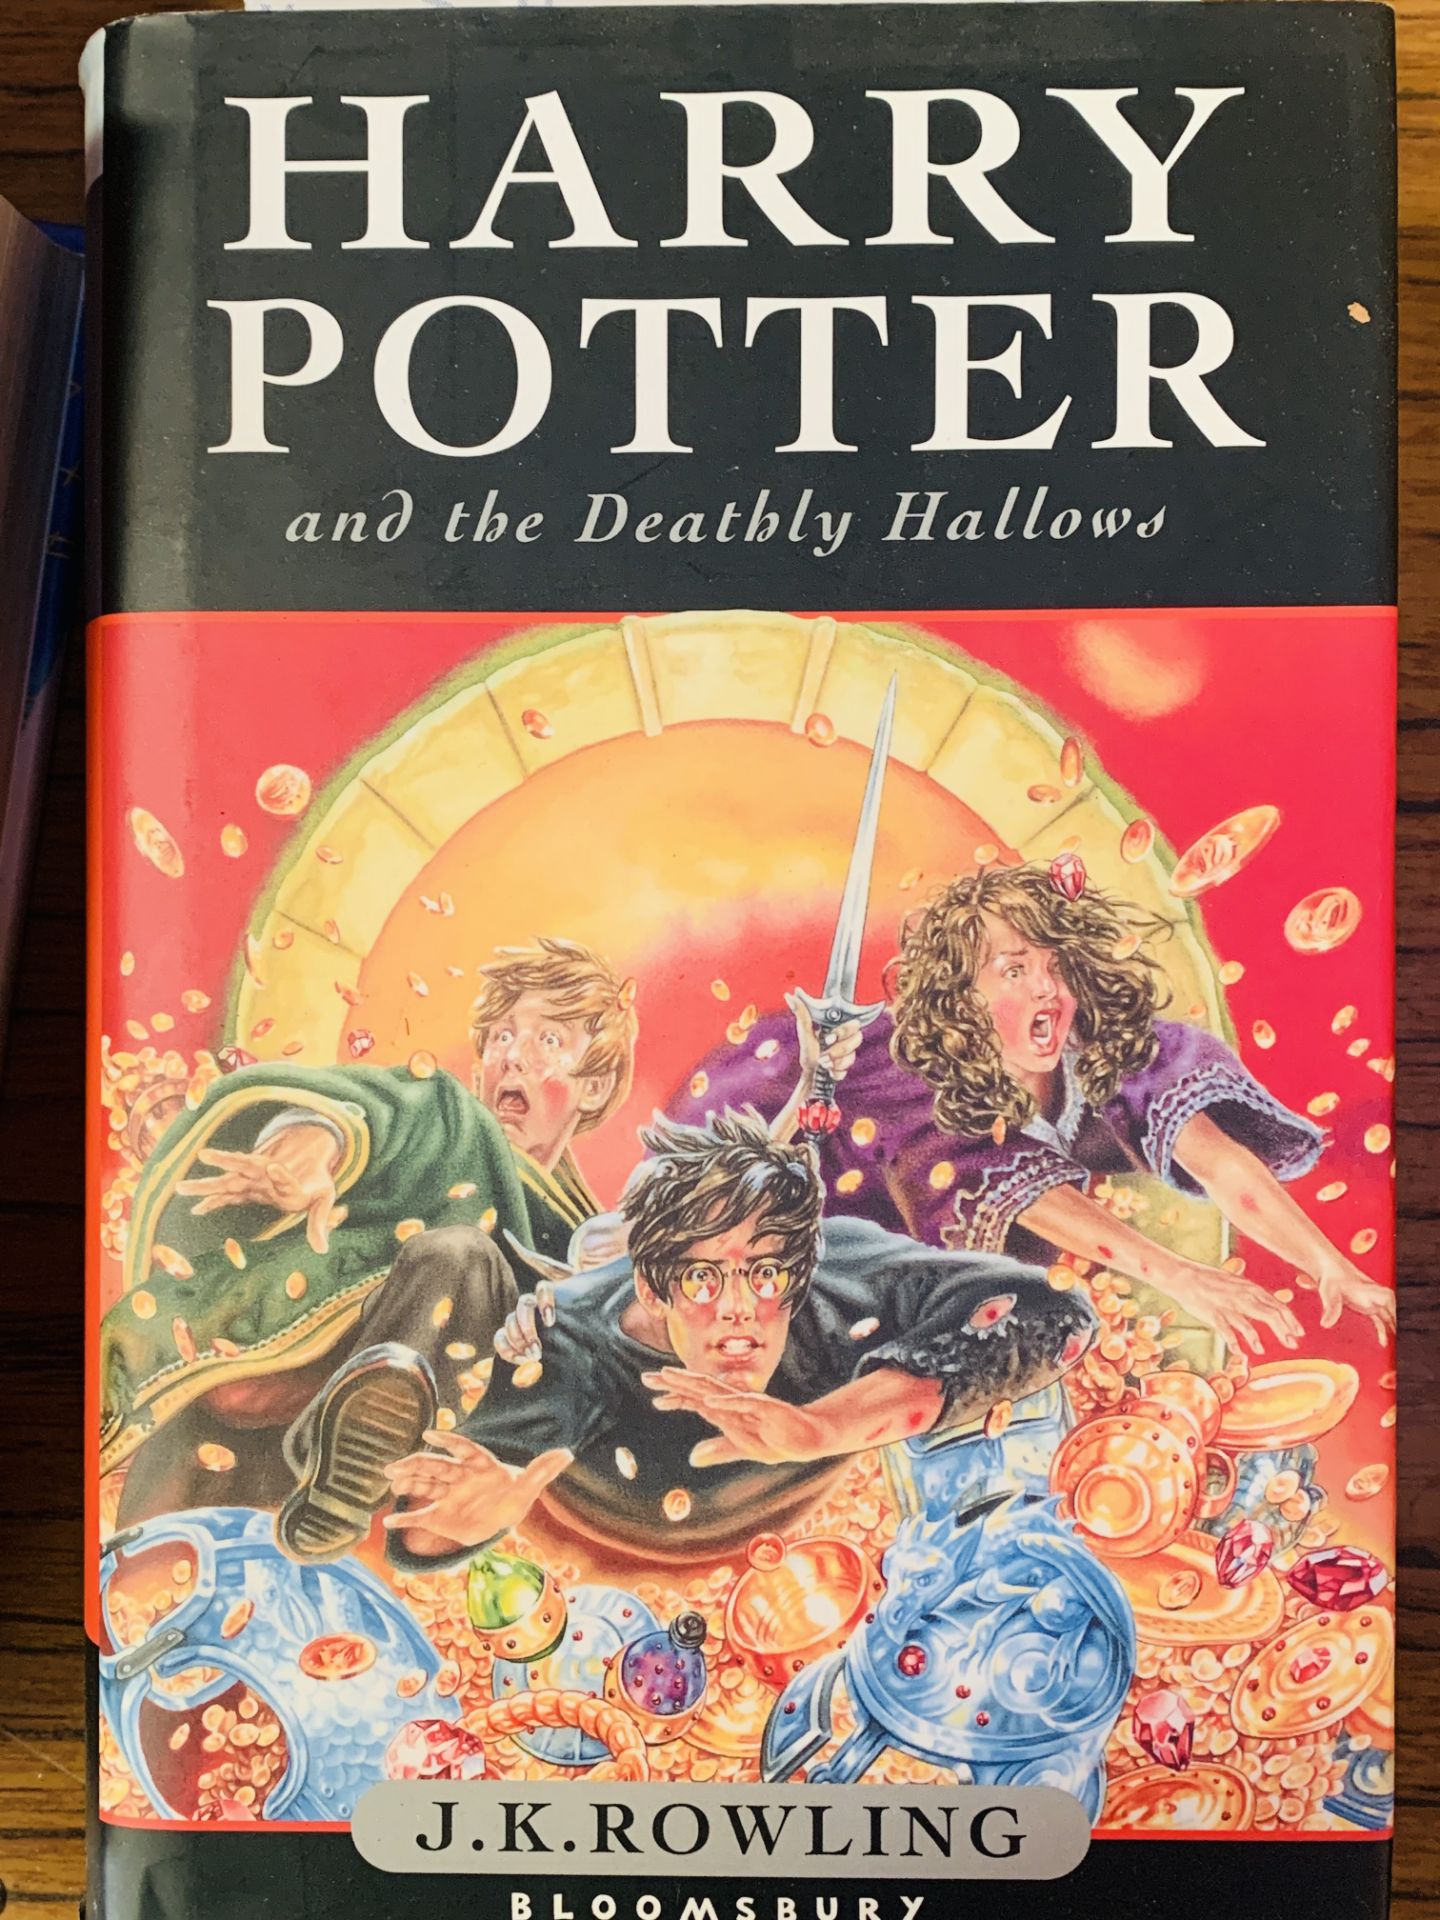 Harry Potter and the Deathly Hallows, by J K Rowling, first Edition, hard back.